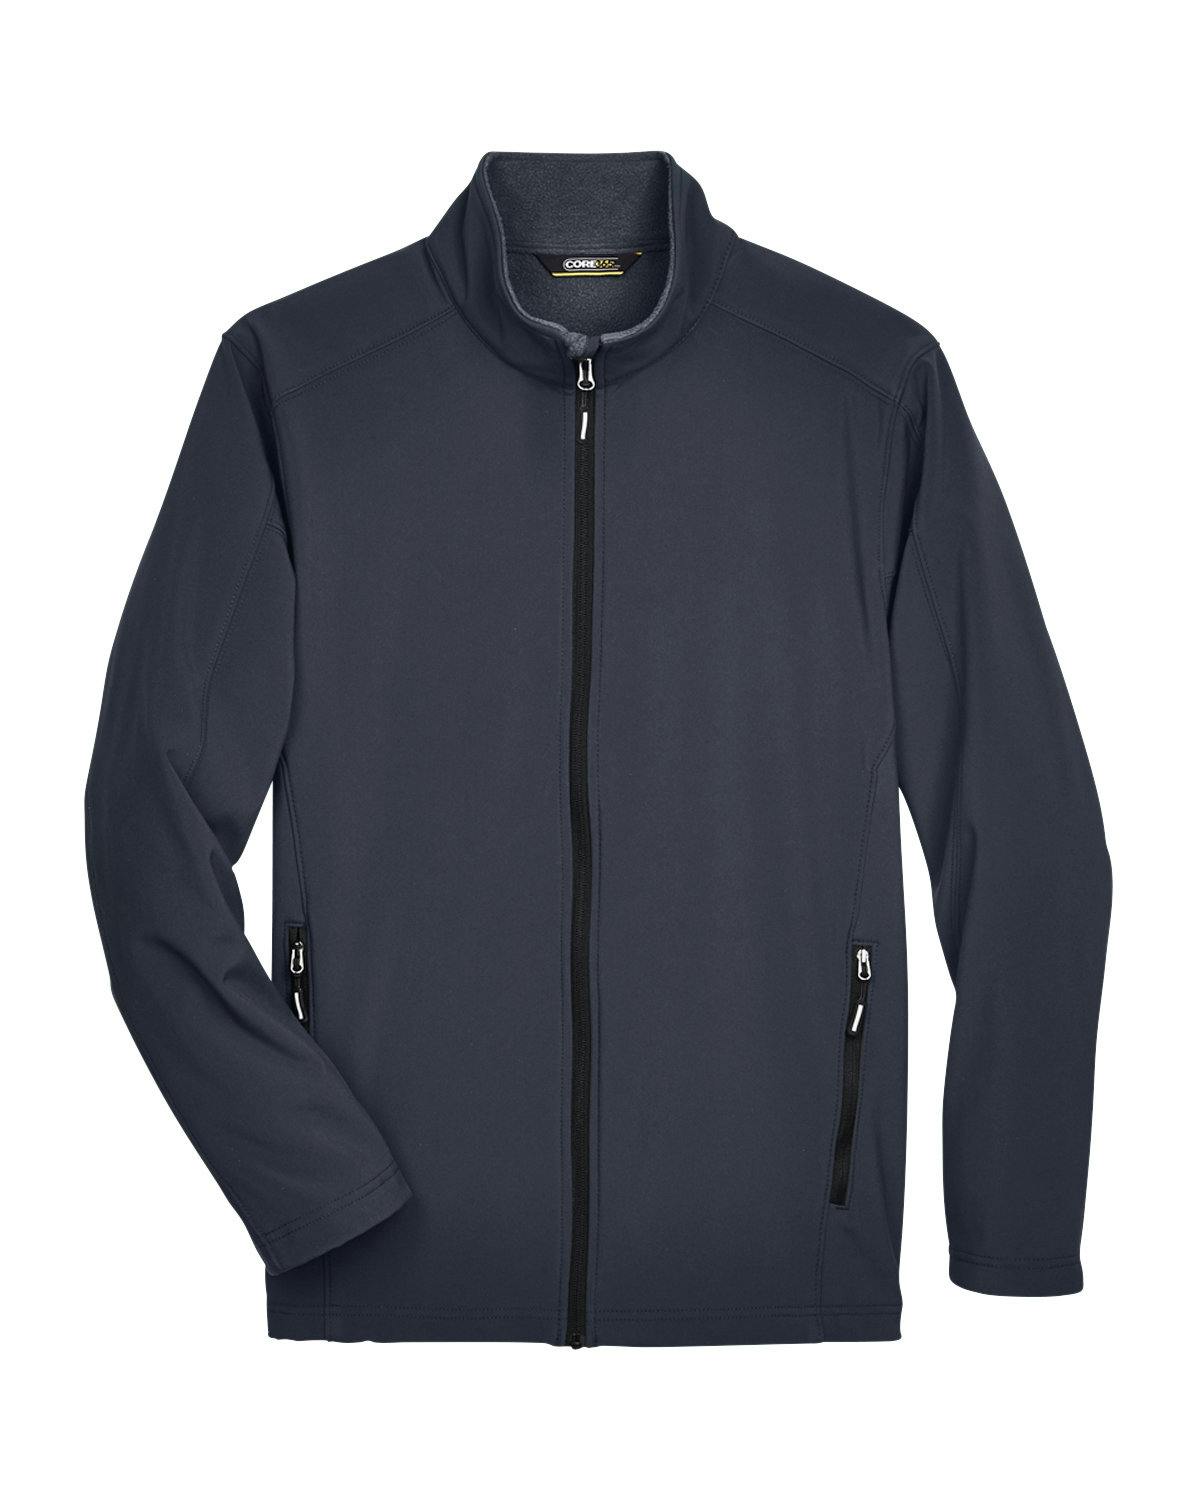 Image for Men's Cruise Two-Layer Fleece Bonded Soft Shell Jacket